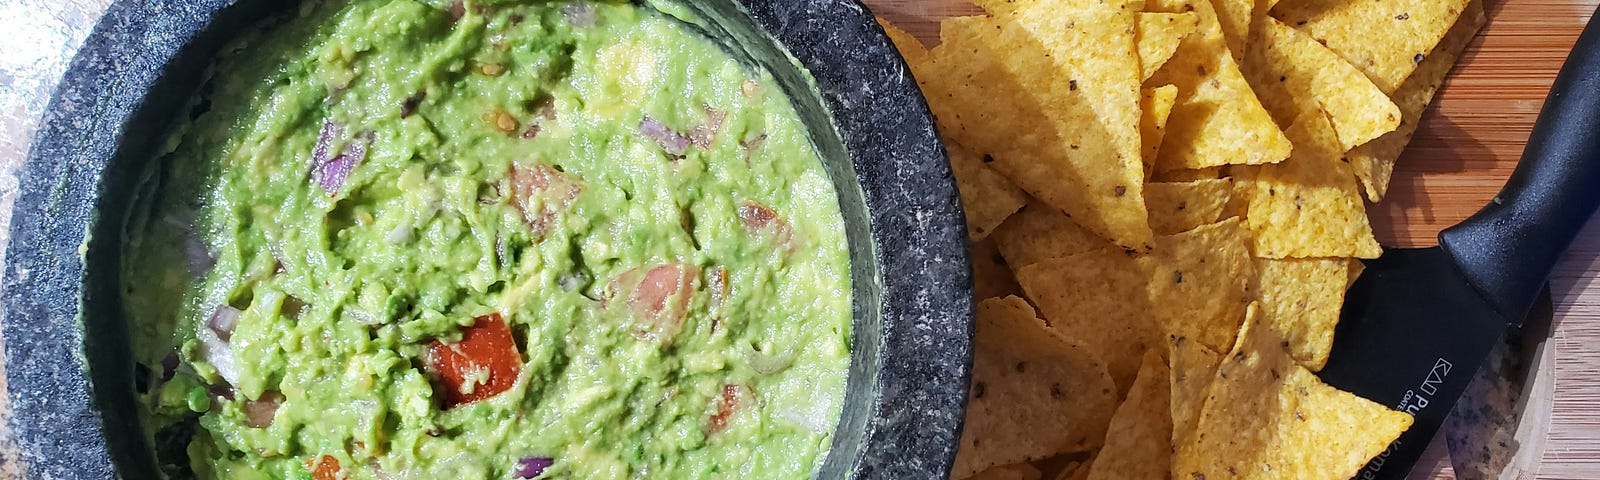 game day food — guacamole and chips